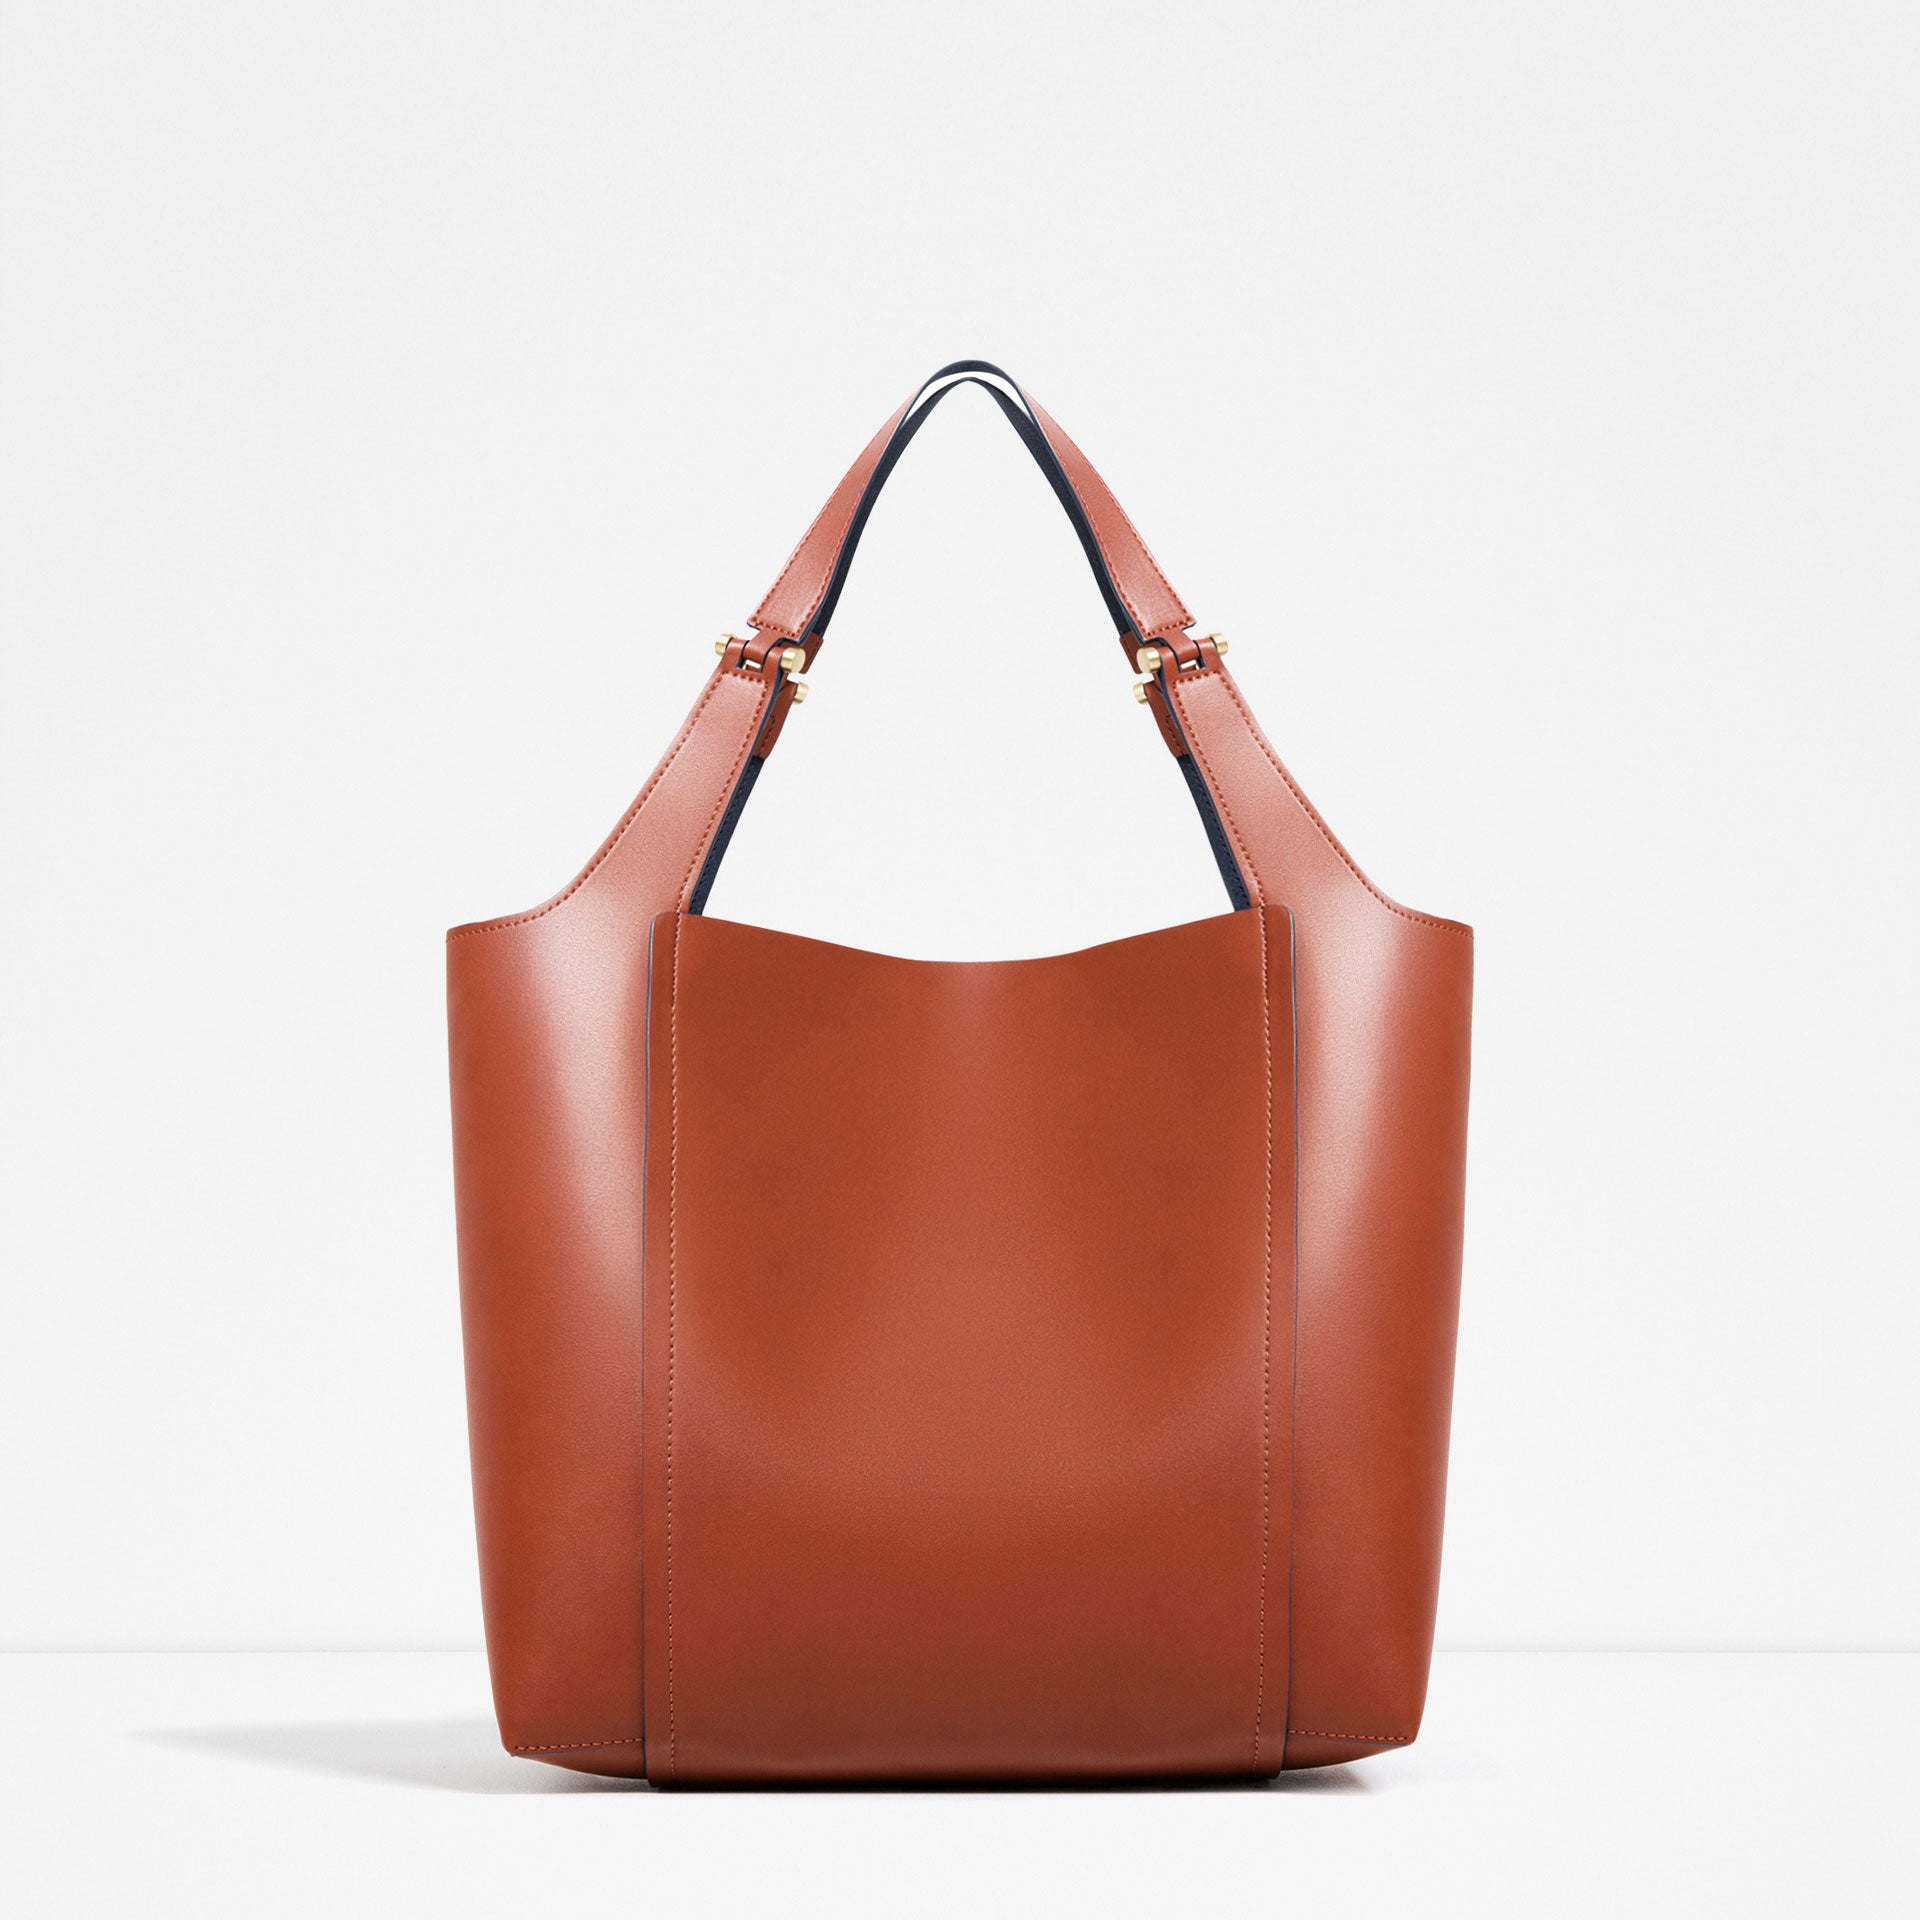 11 Bags Under $100 That You Absolutely Need This Fall
